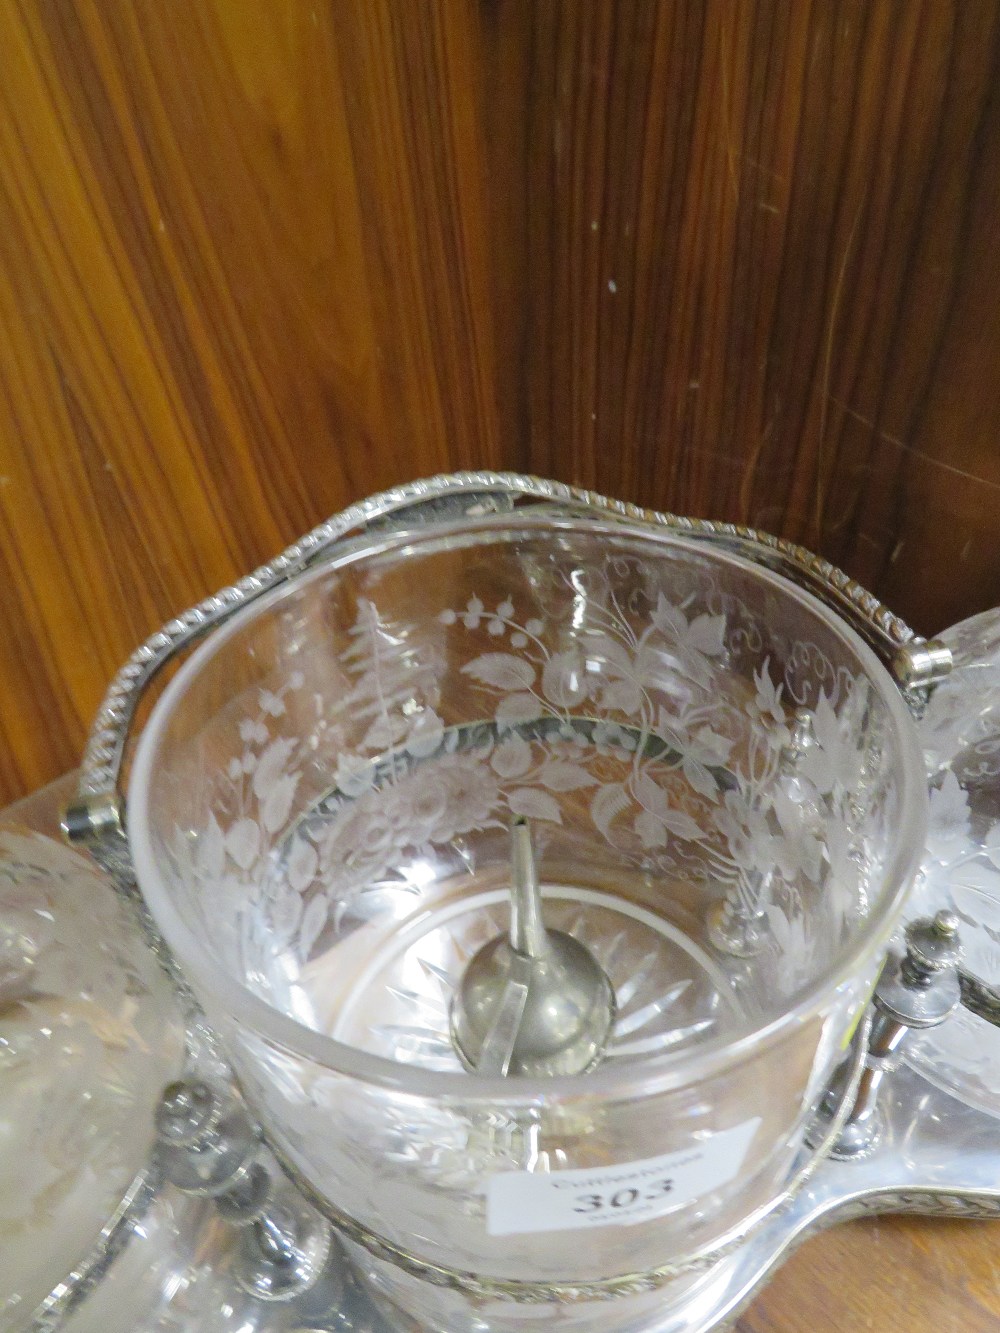 A ELECTRO PLATE DECANTER AND CRACKER BARREL STAND WITH ETCHED GLASS DECANTERS ETC - Image 2 of 3